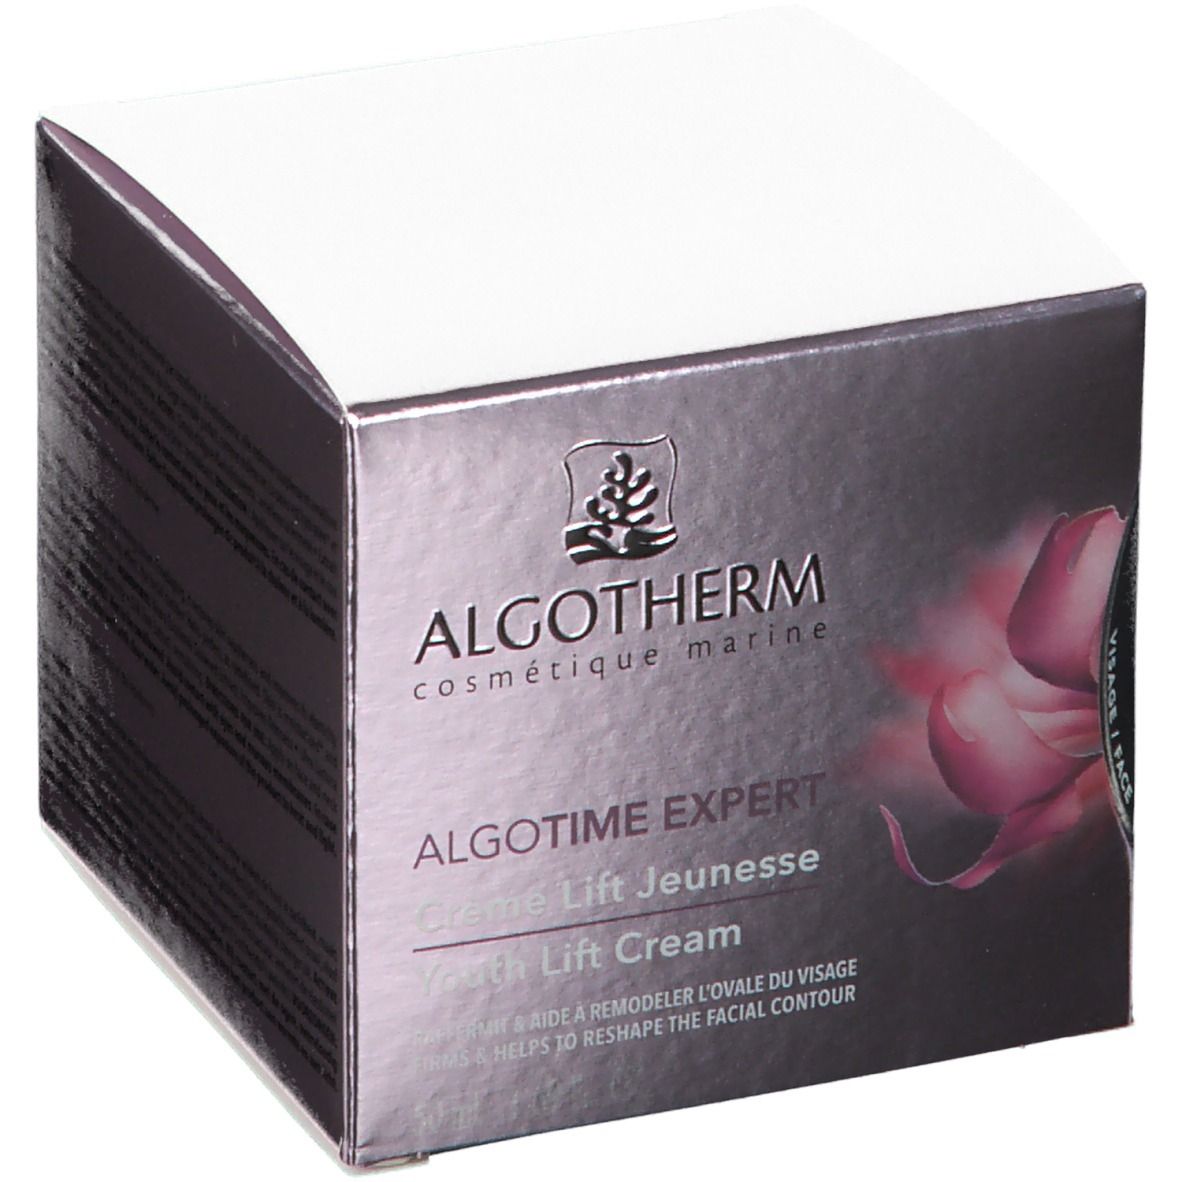 GILBERT Algotherm Algotime Expert Youth Lift Creme